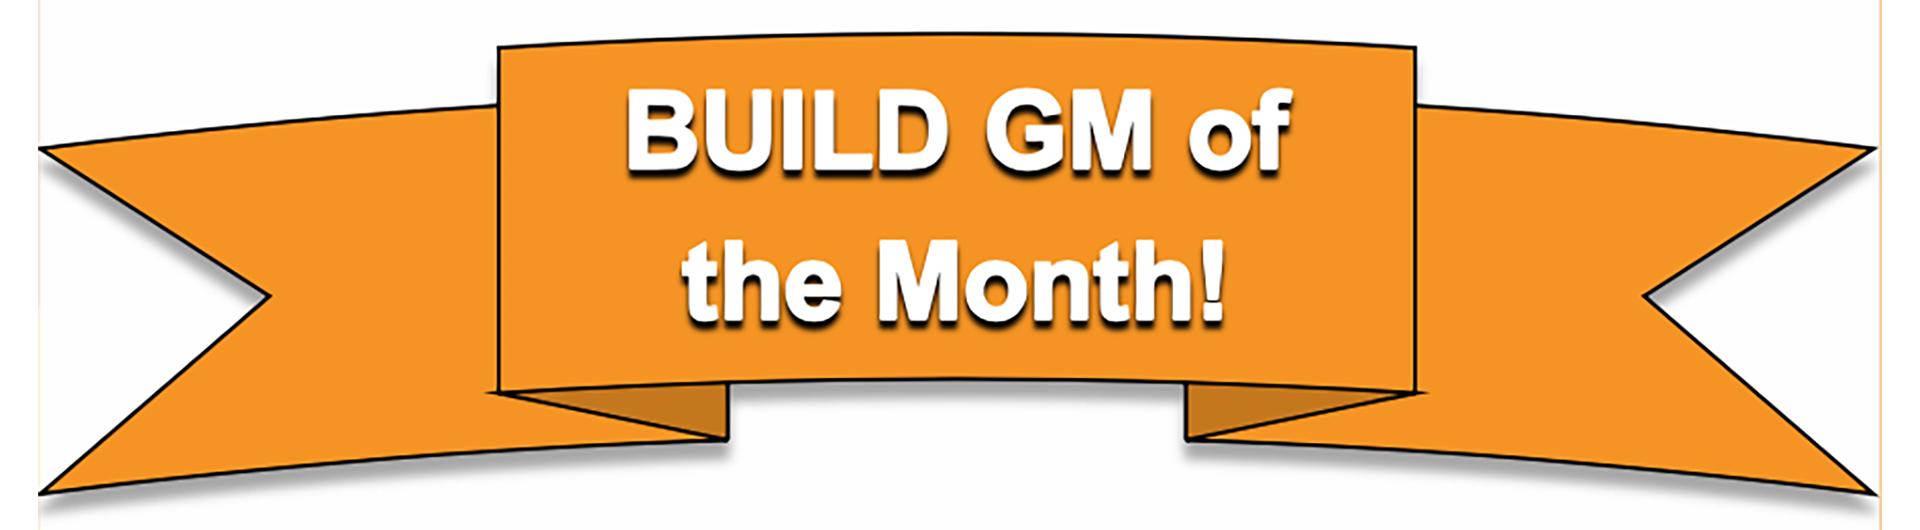 BUILD GM of the Month